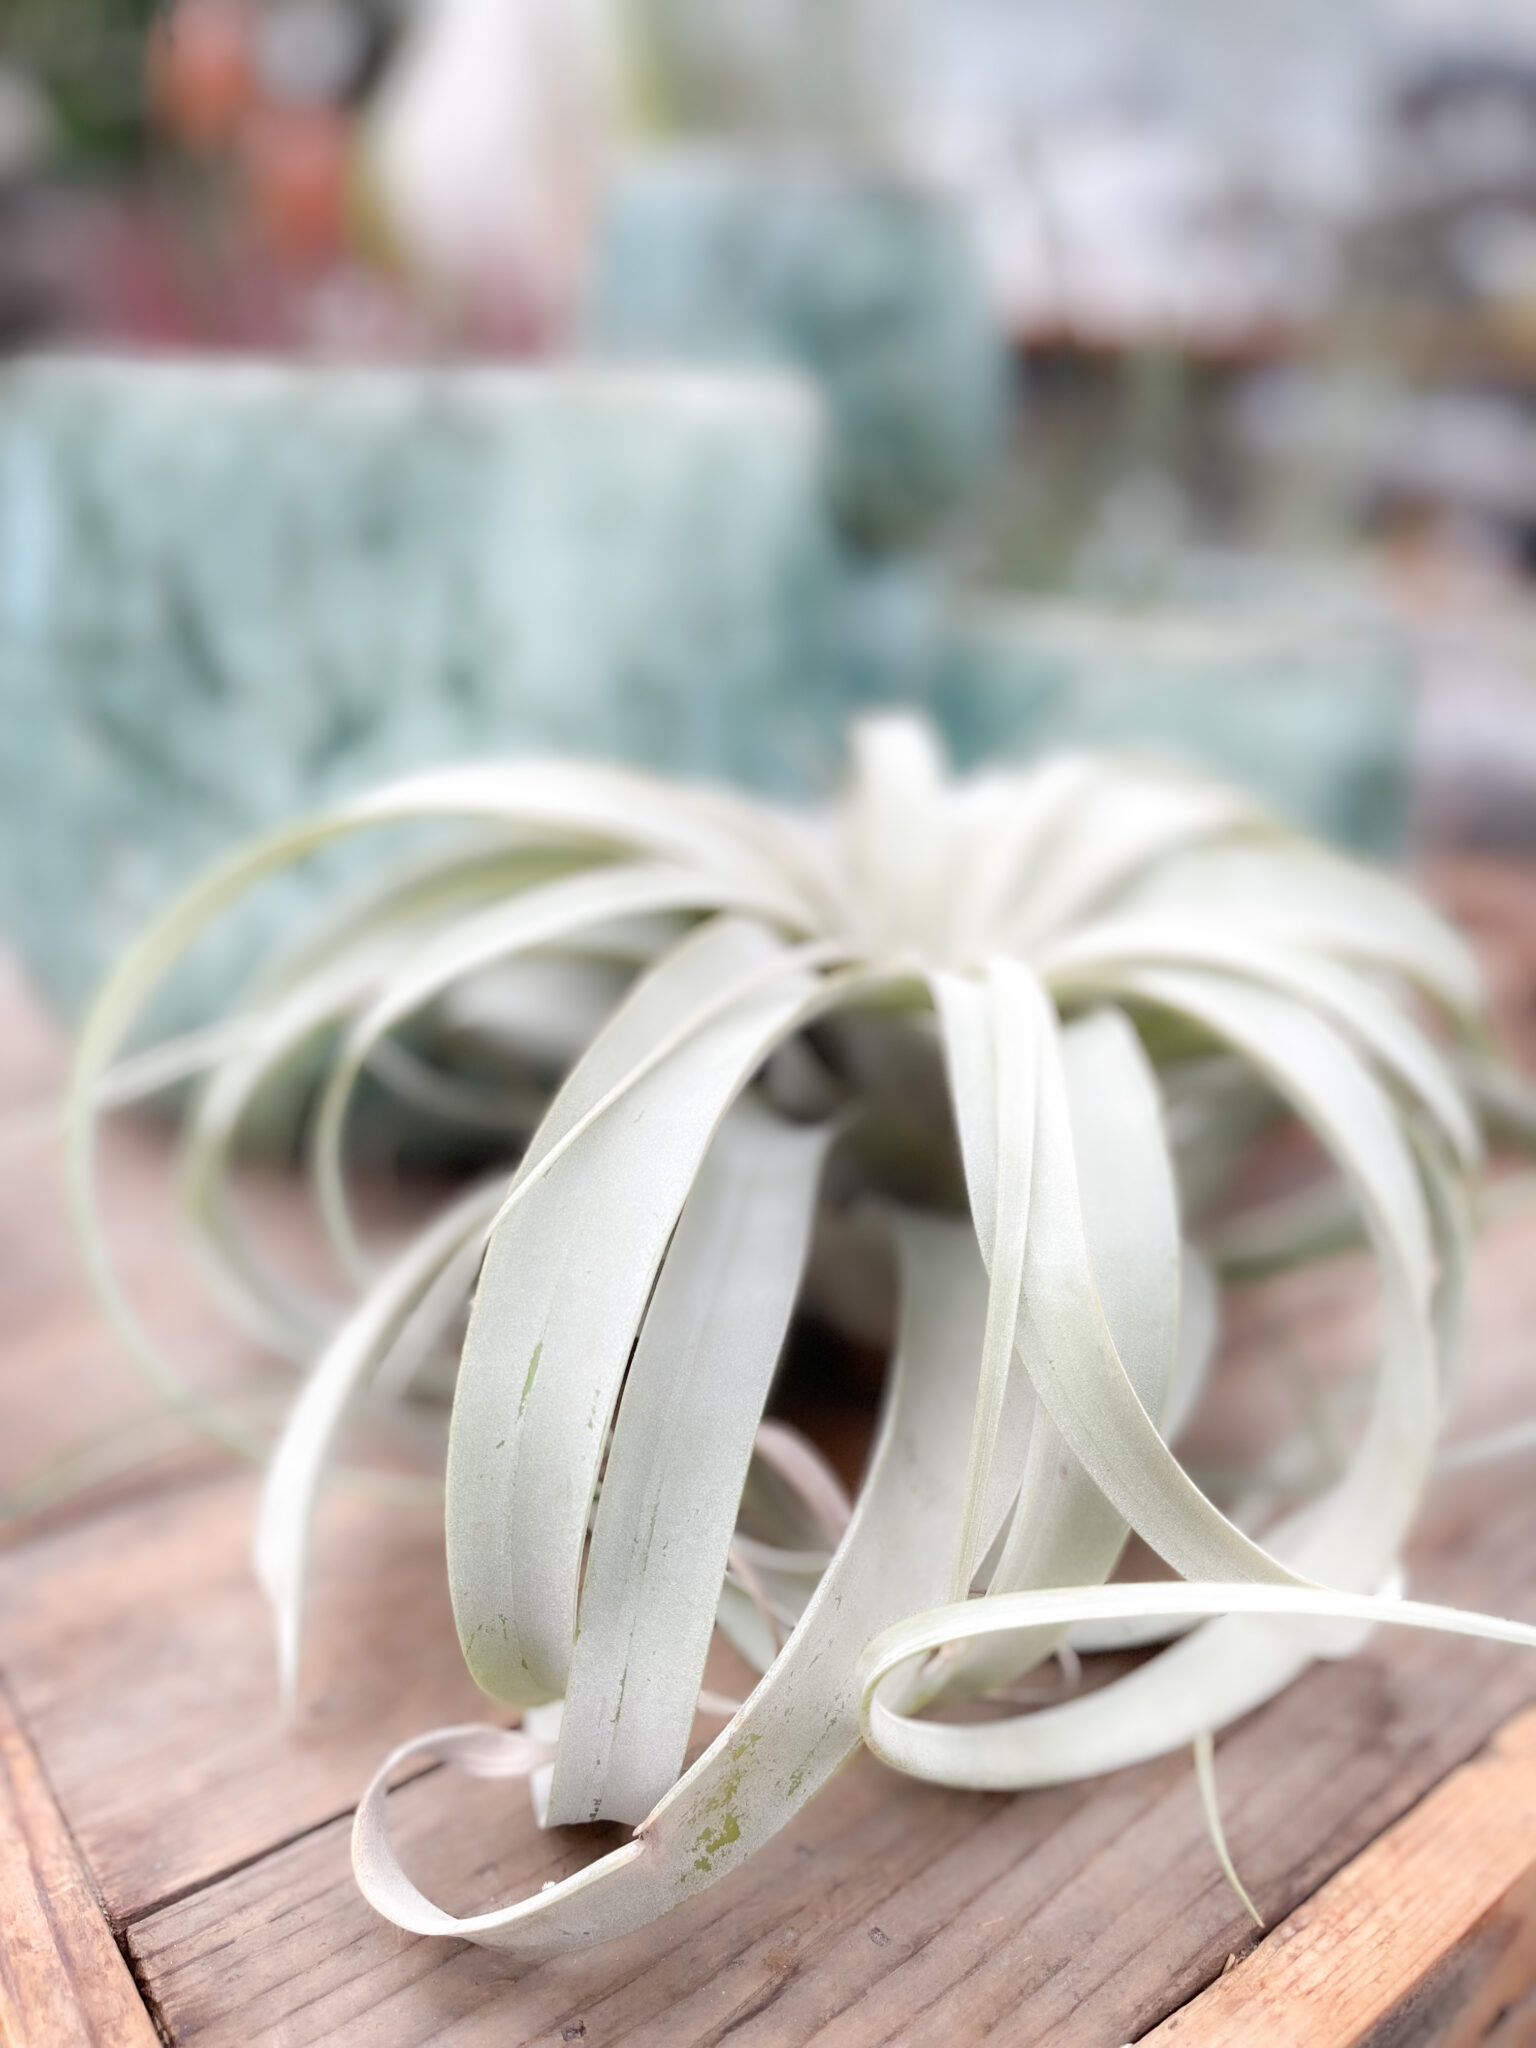 10+ AIR PLANT CARE TIPS you need to know about!